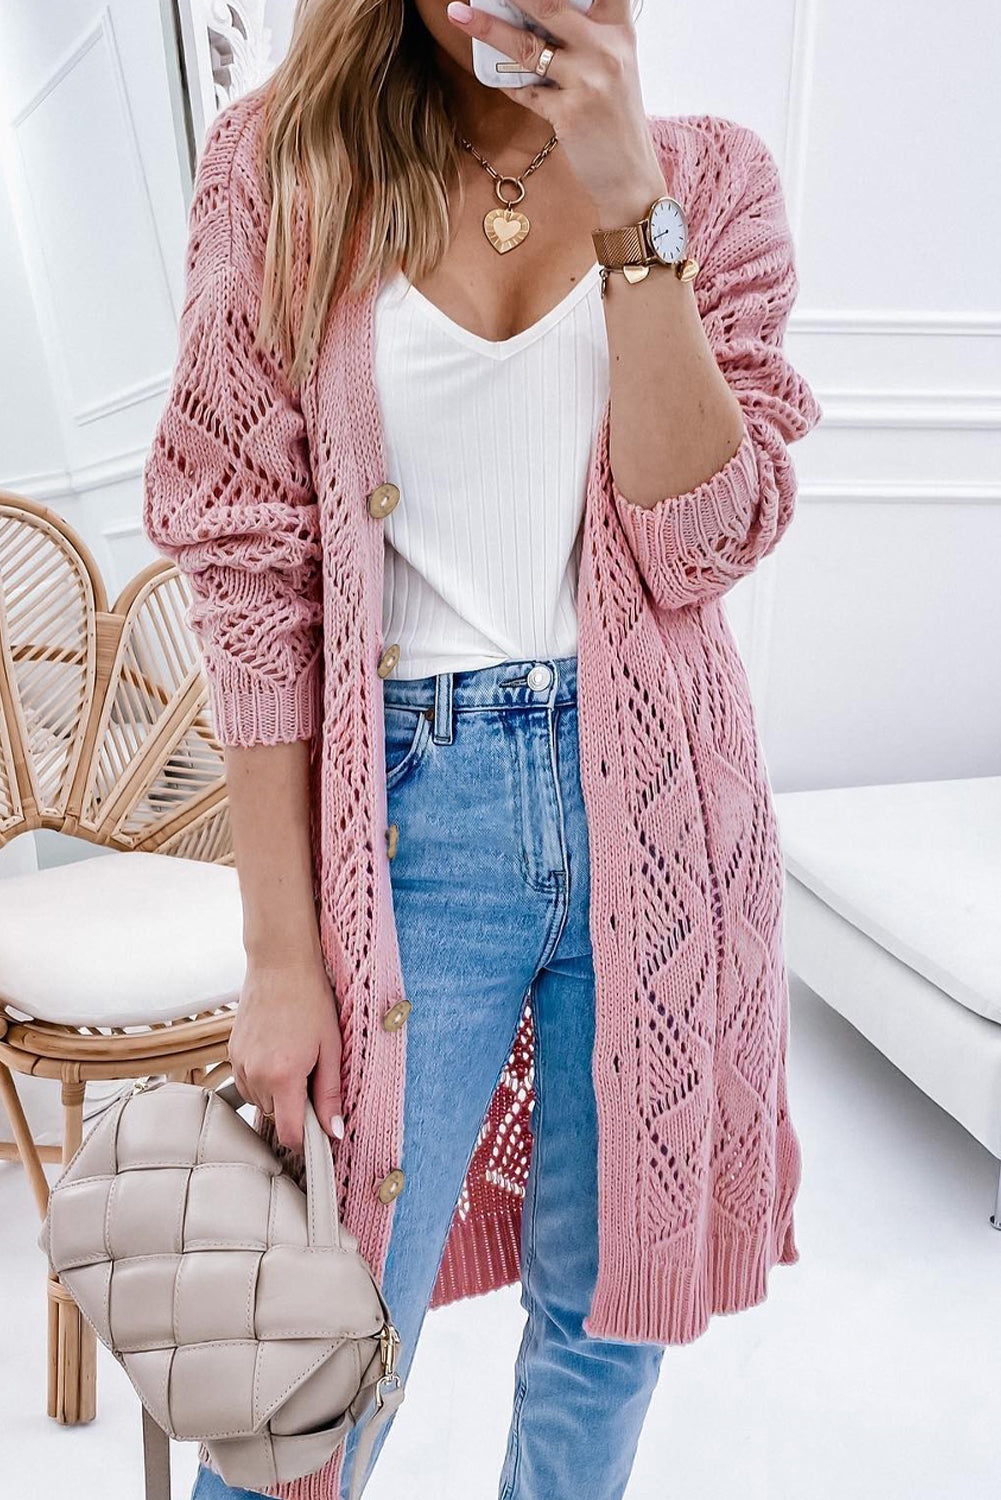 V-Neck Long Sleeve Cardigan - Pink / S - Women’s Clothing & Accessories - Shirts & Tops - 7 - 2024